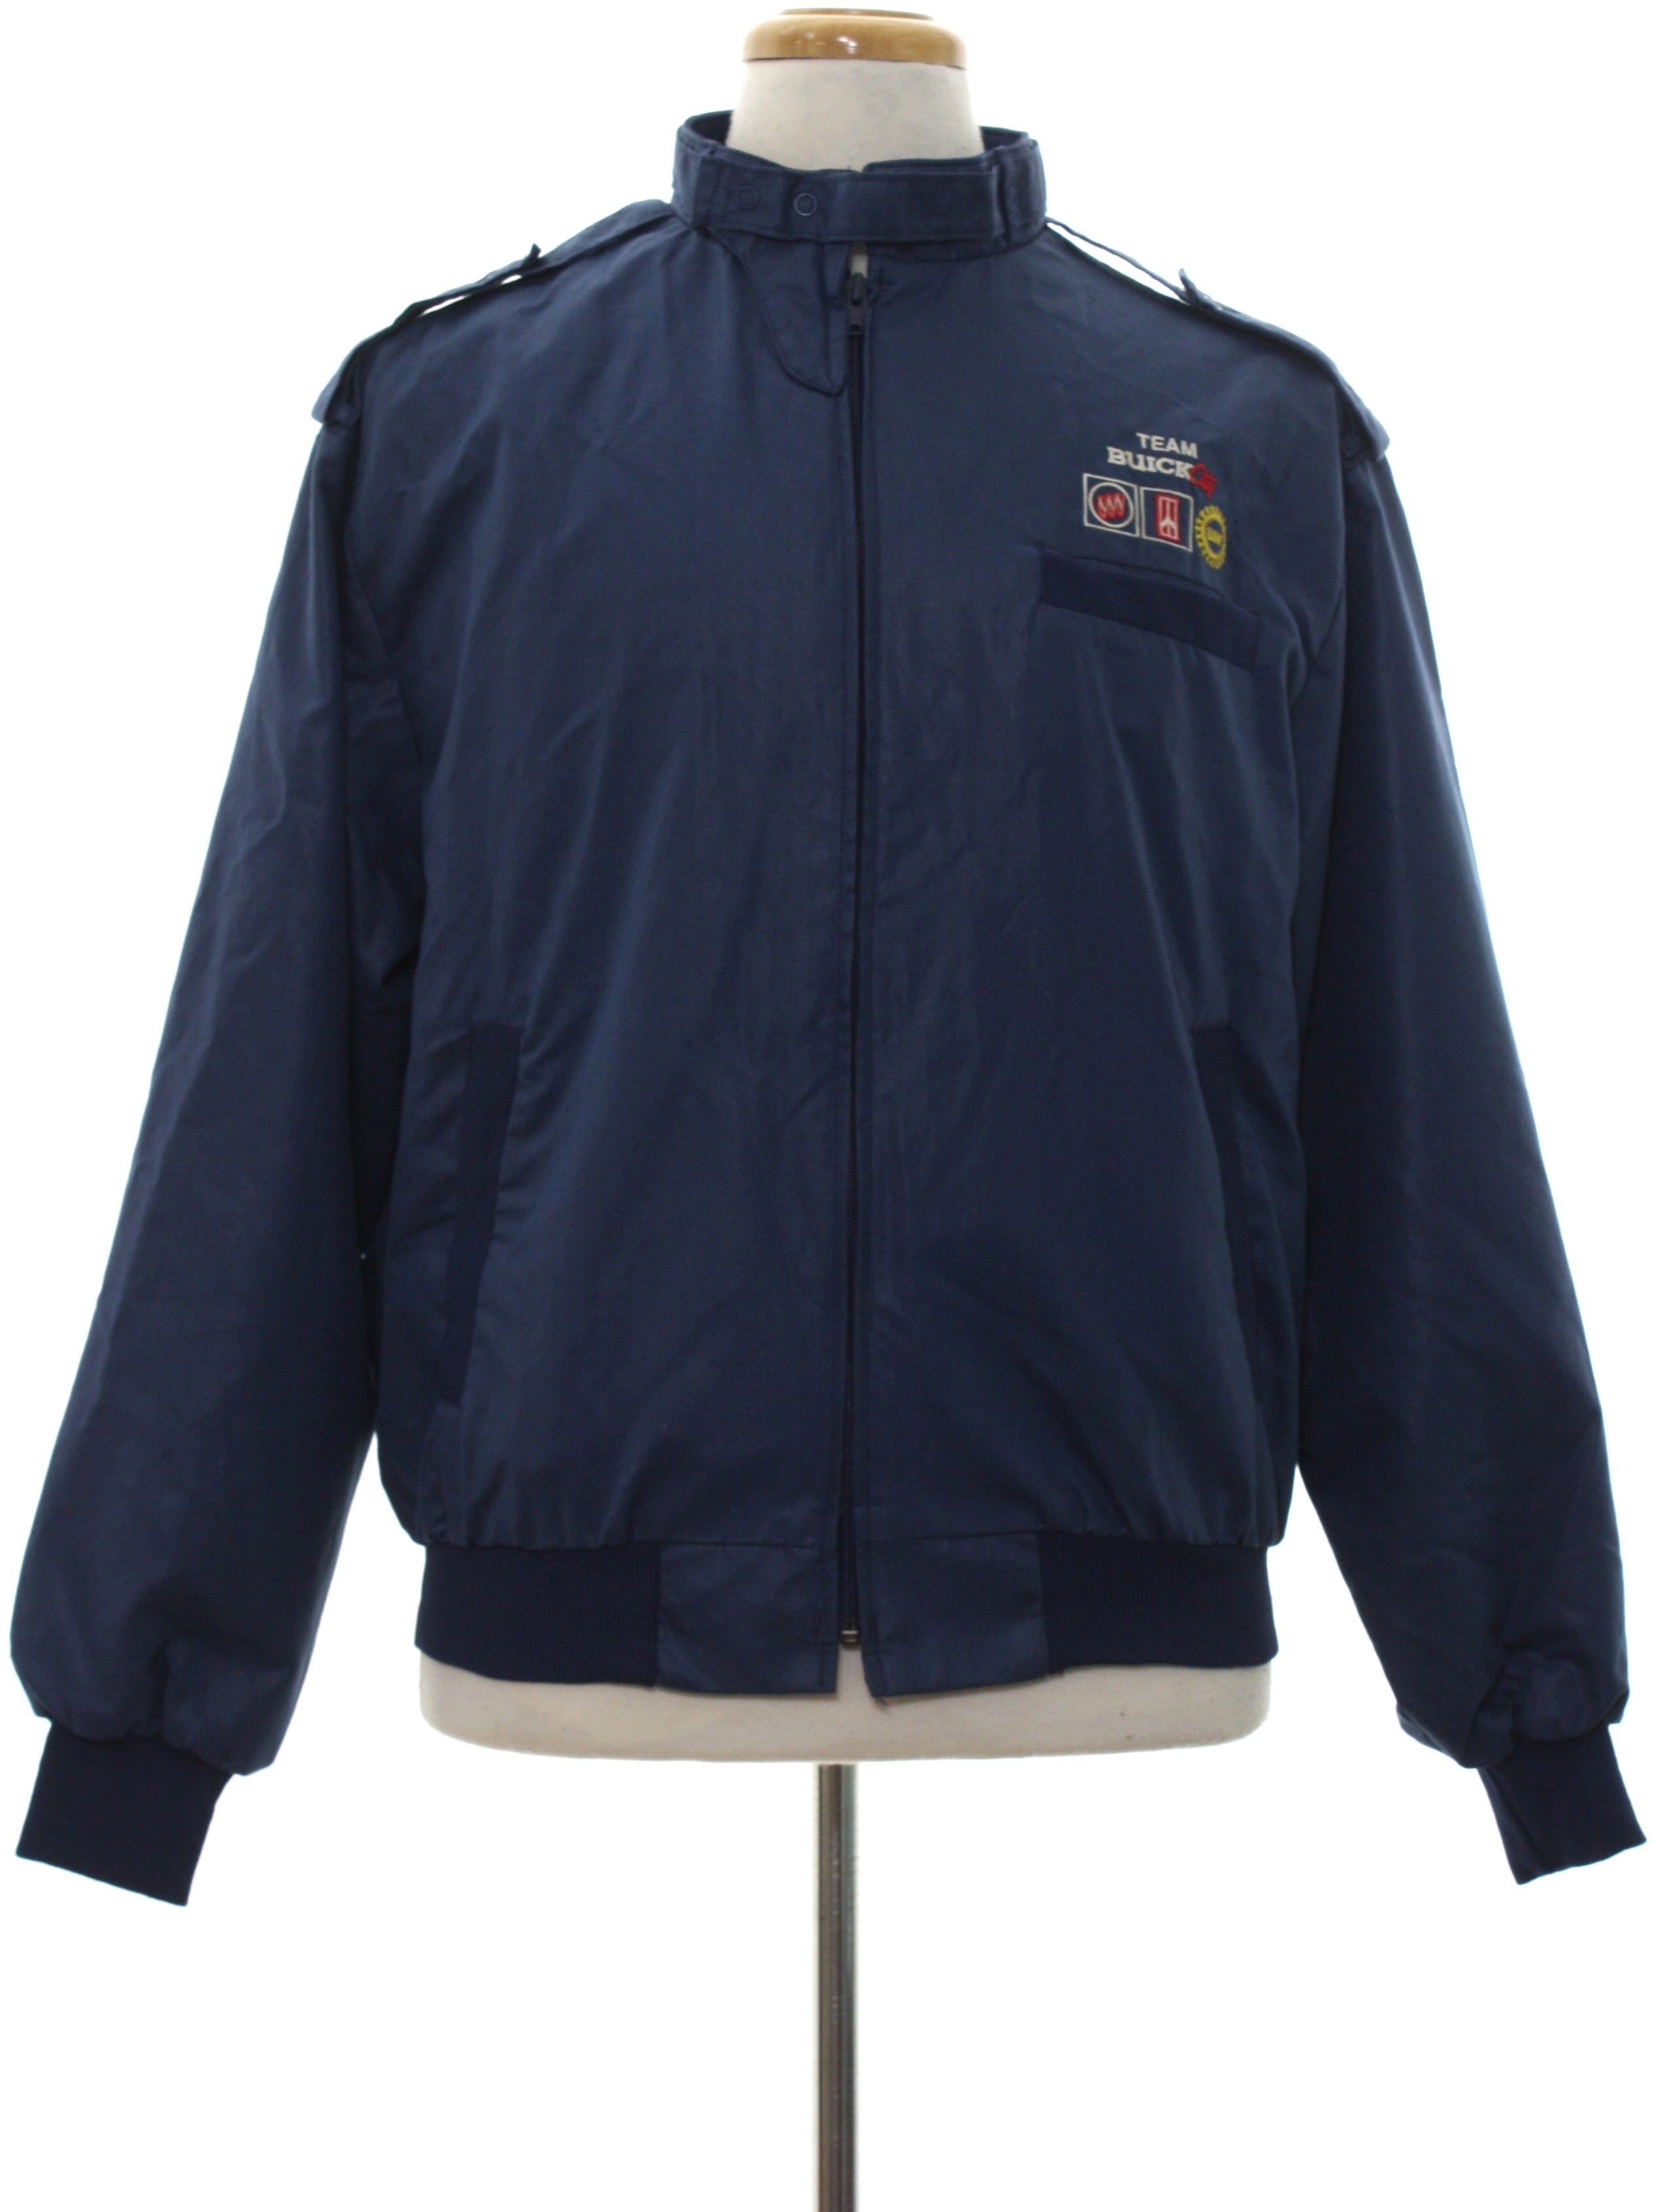 Retro 1980s Jacket: 80s -Pro Fit- Mens navy blue background polyester ...